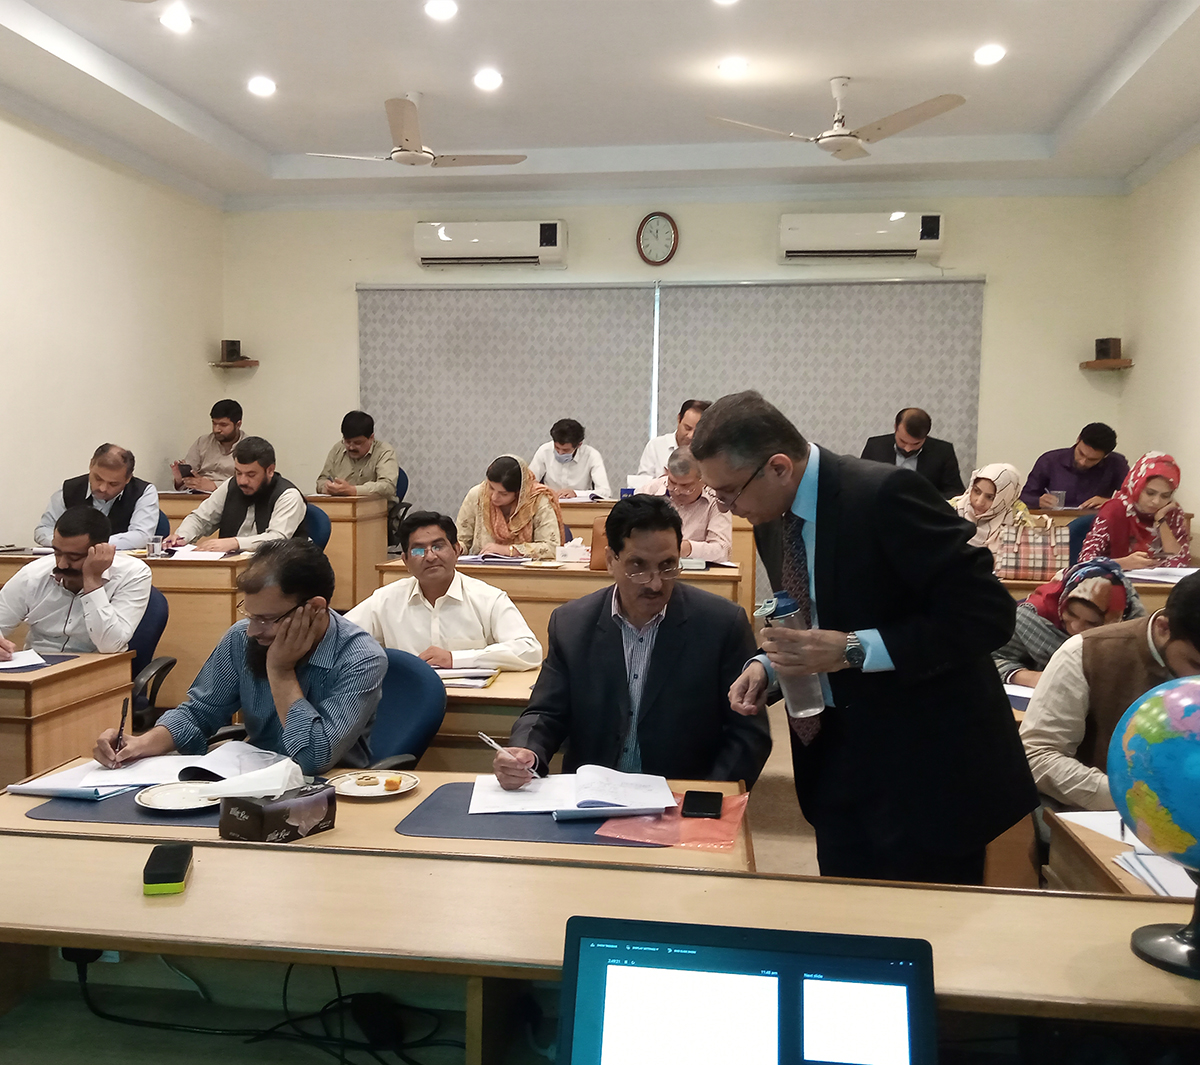 UCP – Centre for Professional Excellence organized external training at Pakistan Railways Academy